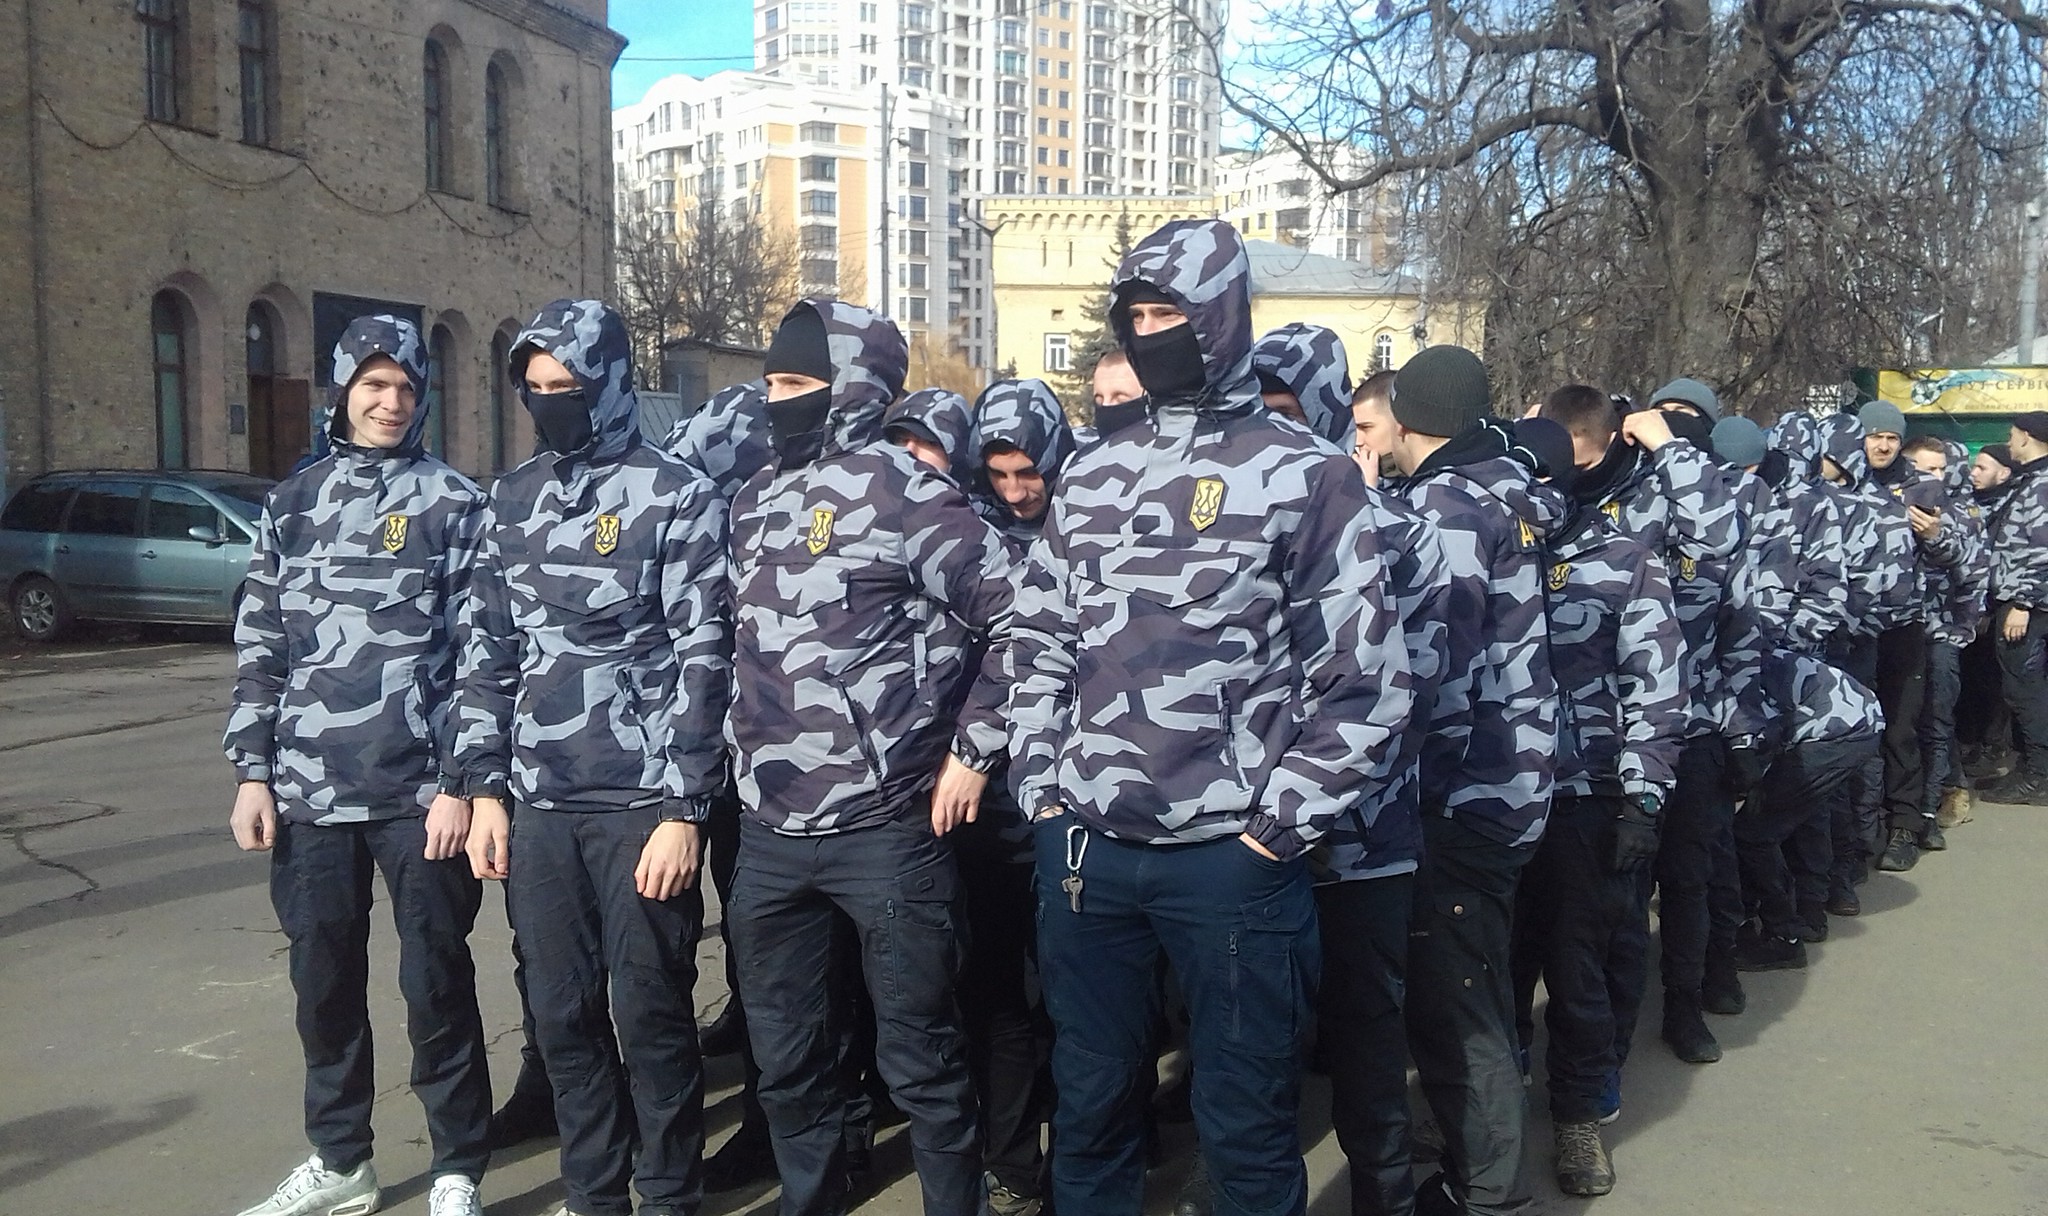 Do Ukraine’s right-wing extremist groups have a chance of derailing presidential elections? ~~